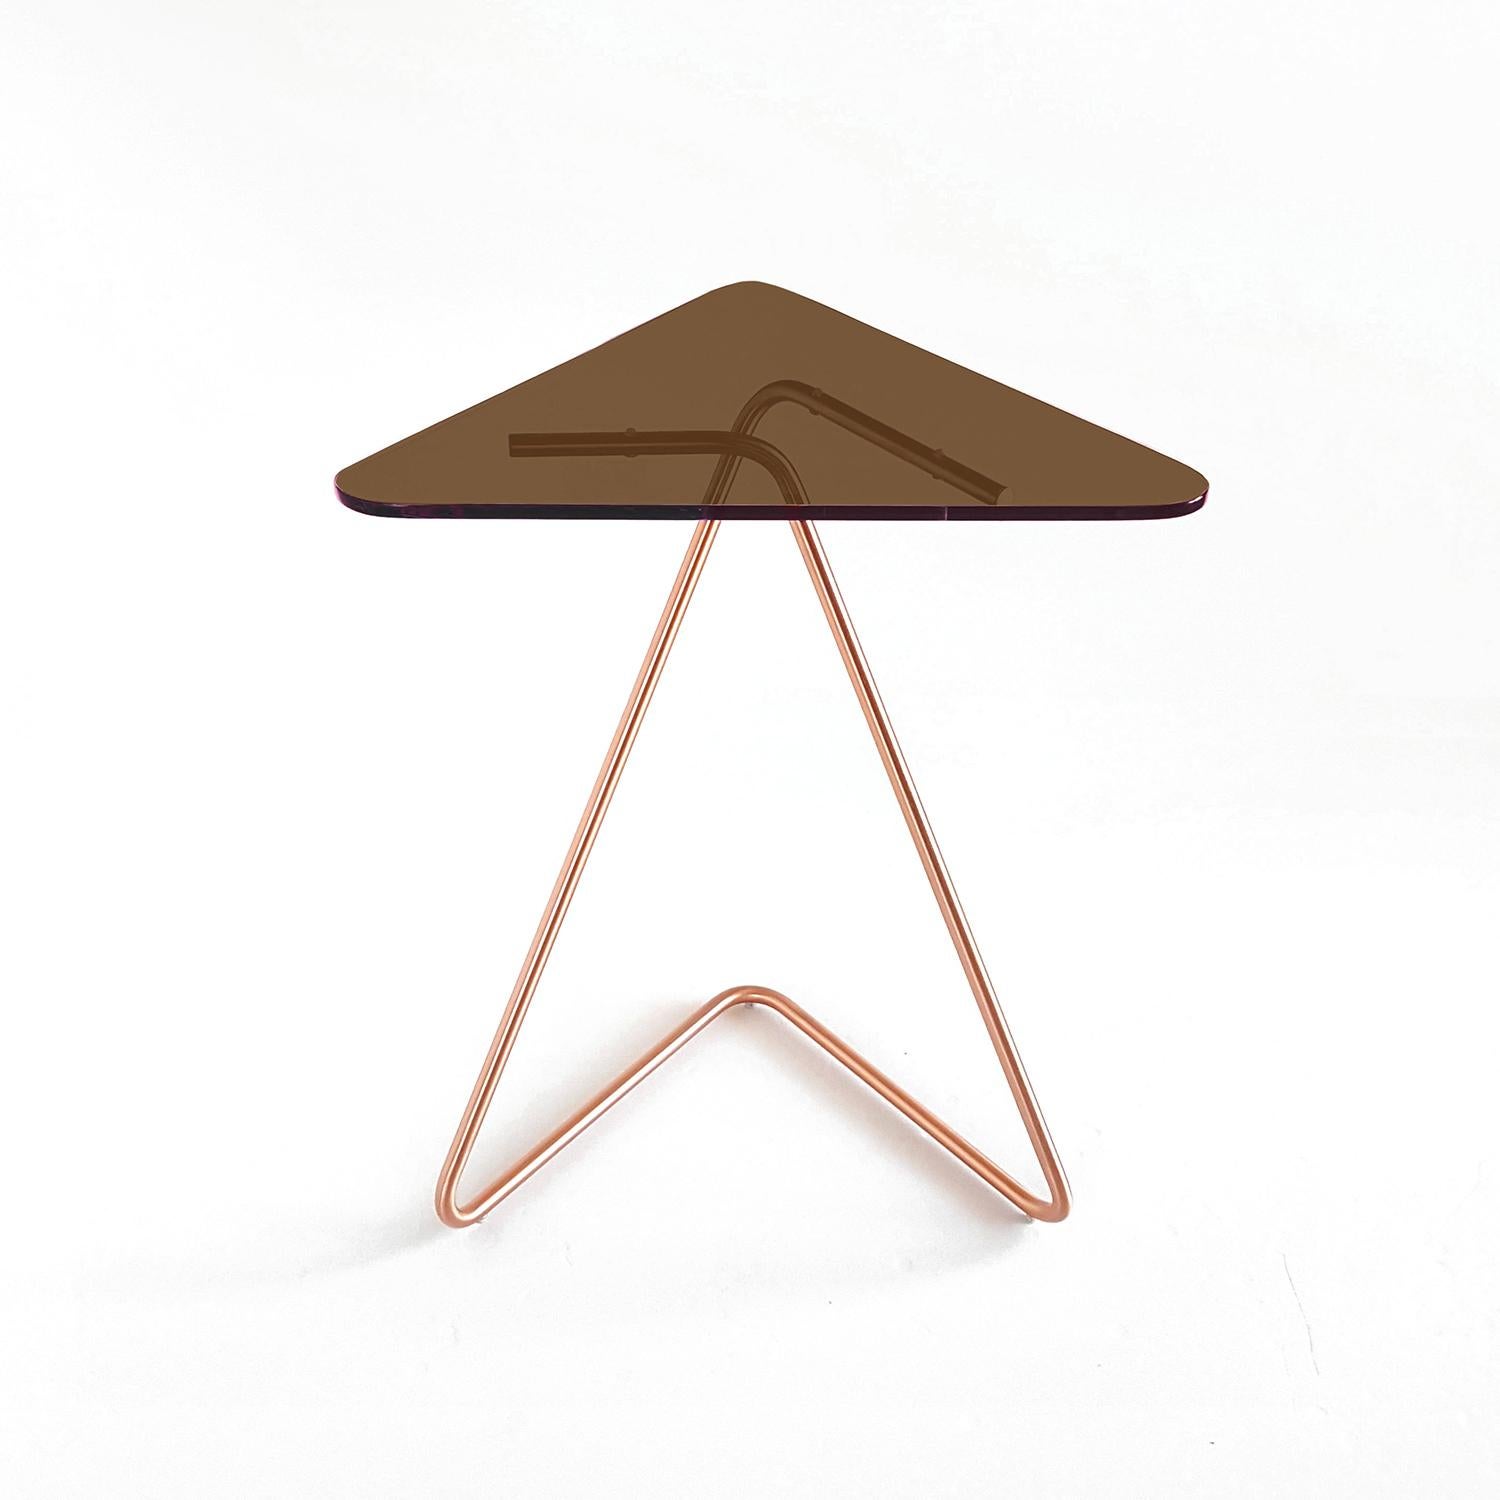 The Triangle side table by Rita Kettaneh 
Dimensions: The base: brushed stainless steel plated with copper
 optionally plated with copper or brass
 The top: acrylic
Materials: H 49.5 x W 41 x D 9.5 cm
Weight: 2.6 Kg

Colors and Finishes: